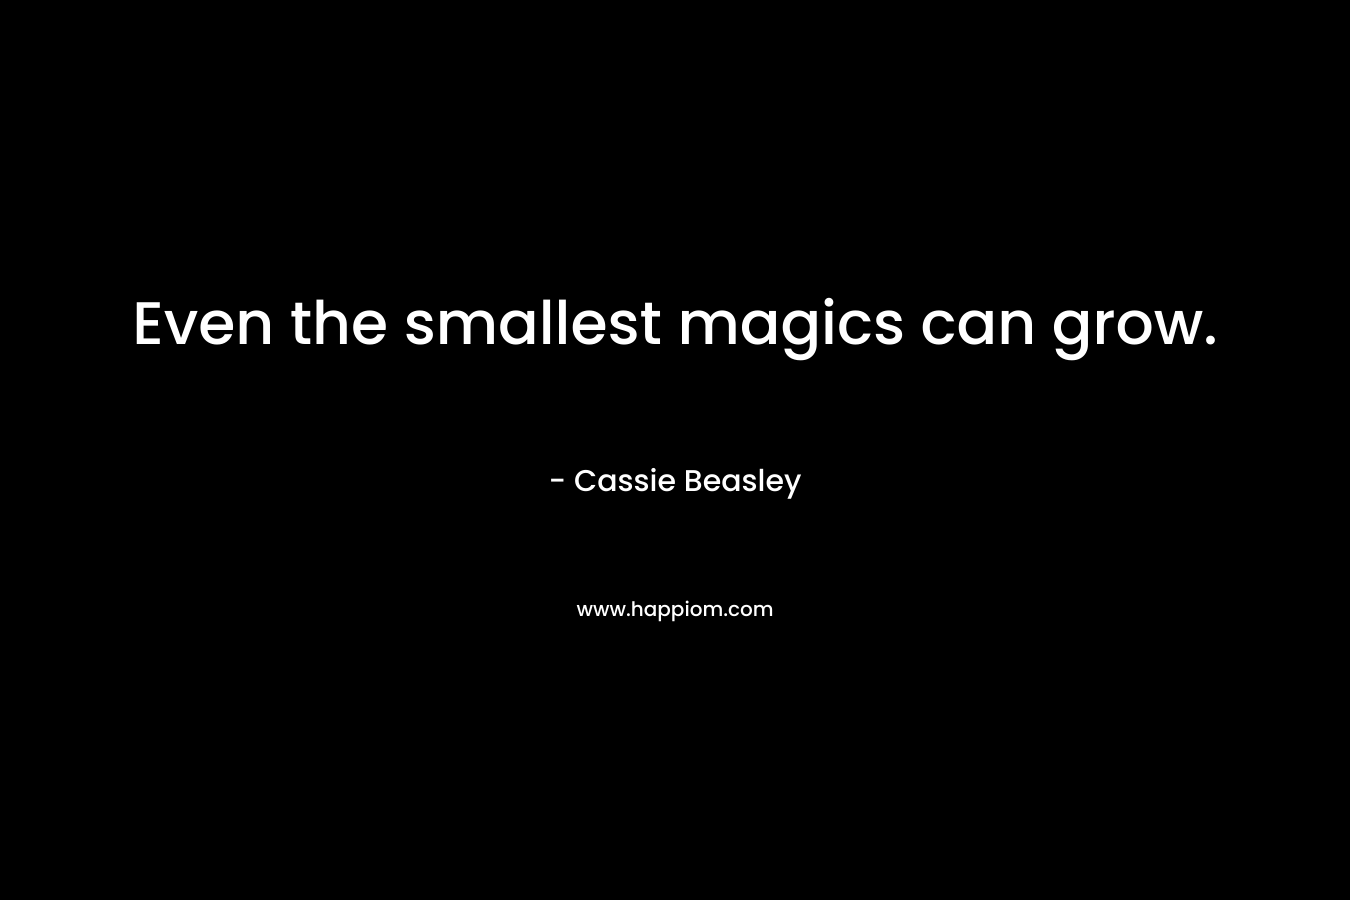 Even the smallest magics can grow. – Cassie Beasley